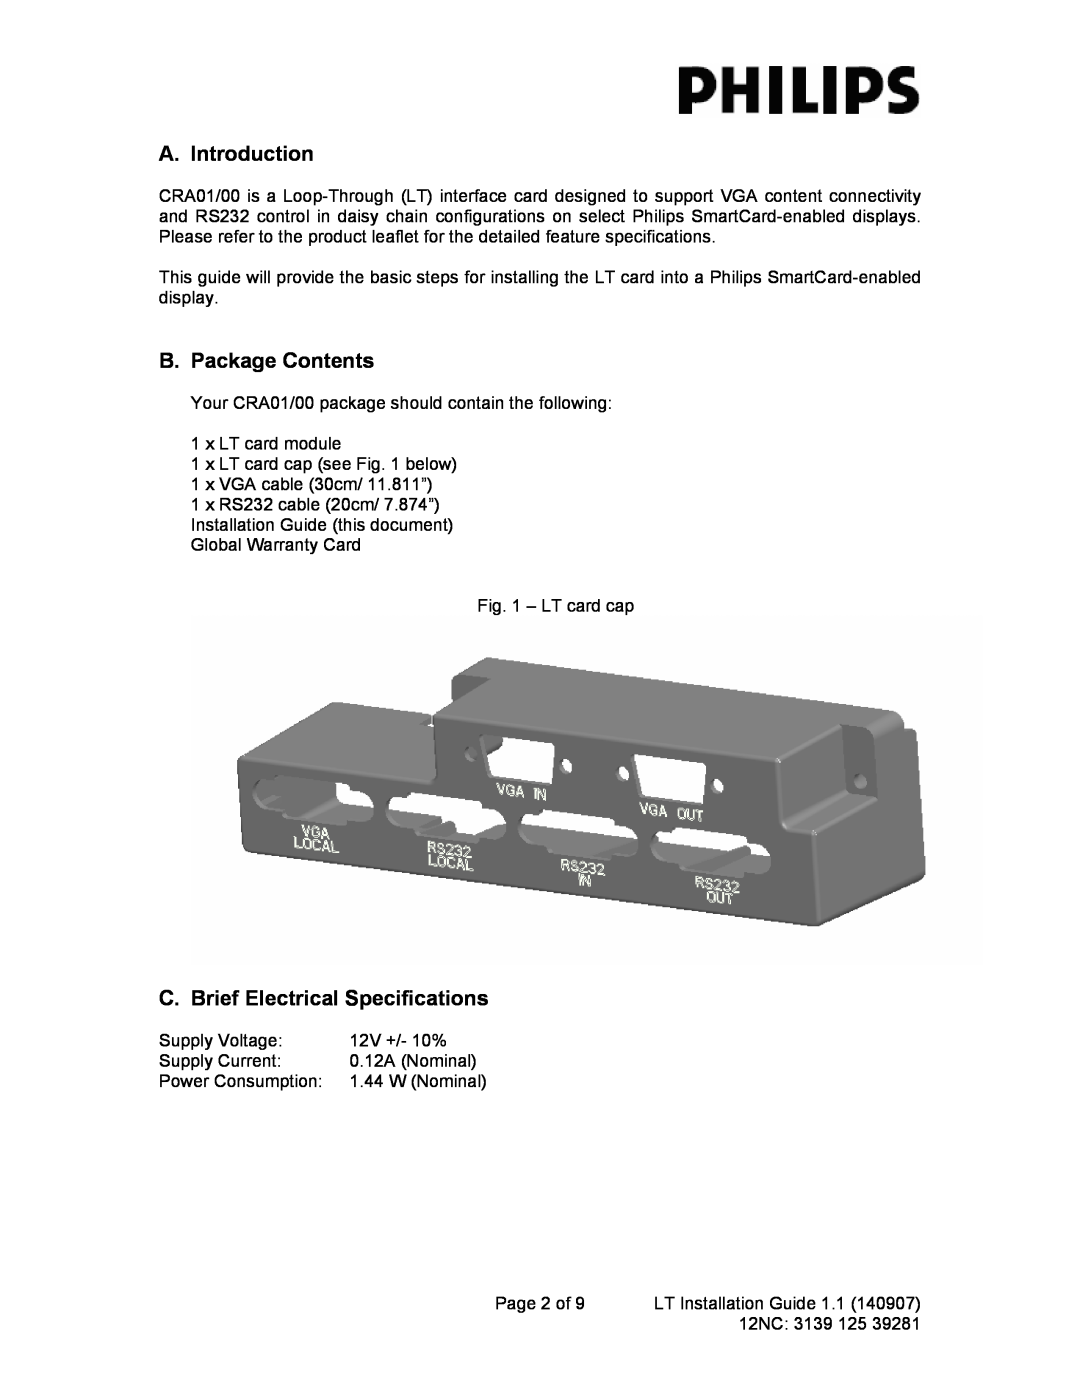 Philips CRA01/00 manual A. Introduction, B. Package Contents, C. Brief Electrical Specifications 